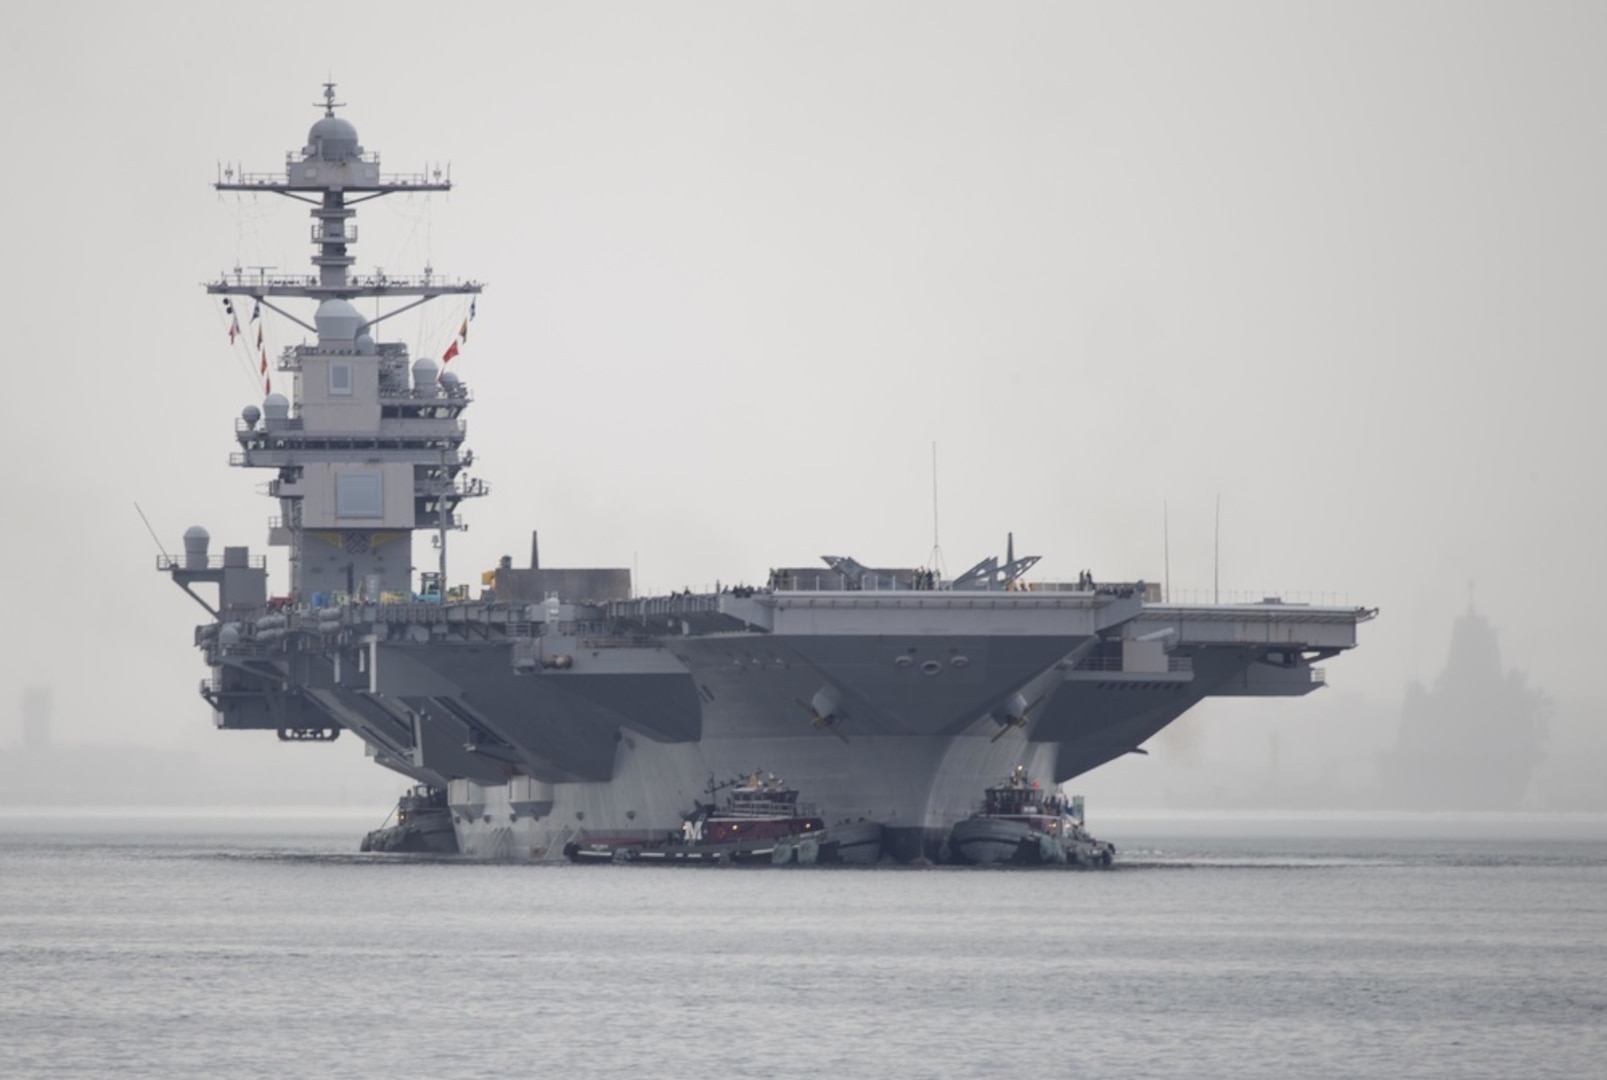 NSWC Philadelphia Completes Preliminary Design Review of the Ship Control System-Government for USS Gerald R. Ford (CVN 78) Class